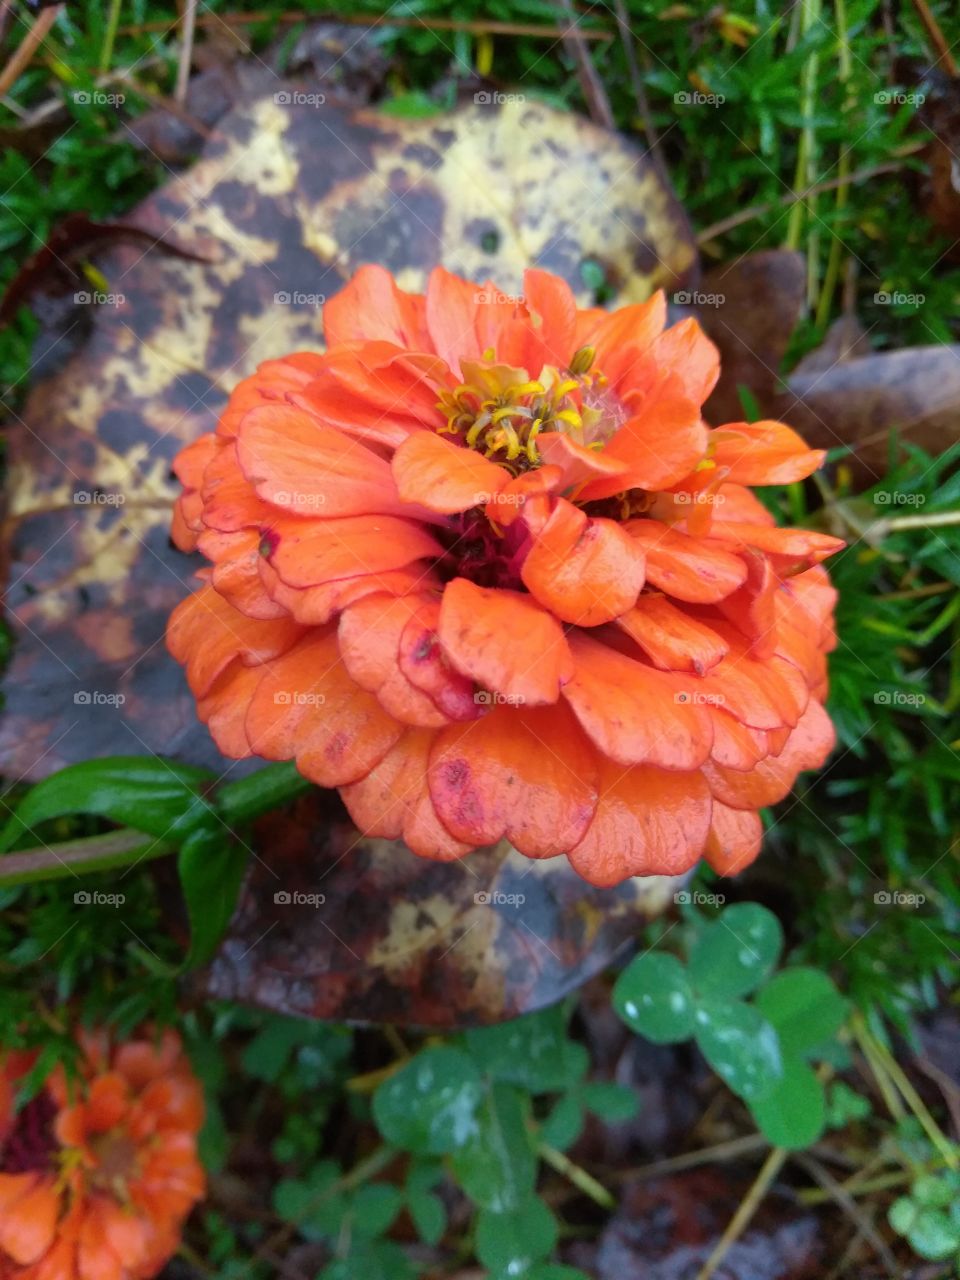 I am in love with the bright orange color of this flower it really catches the eye!